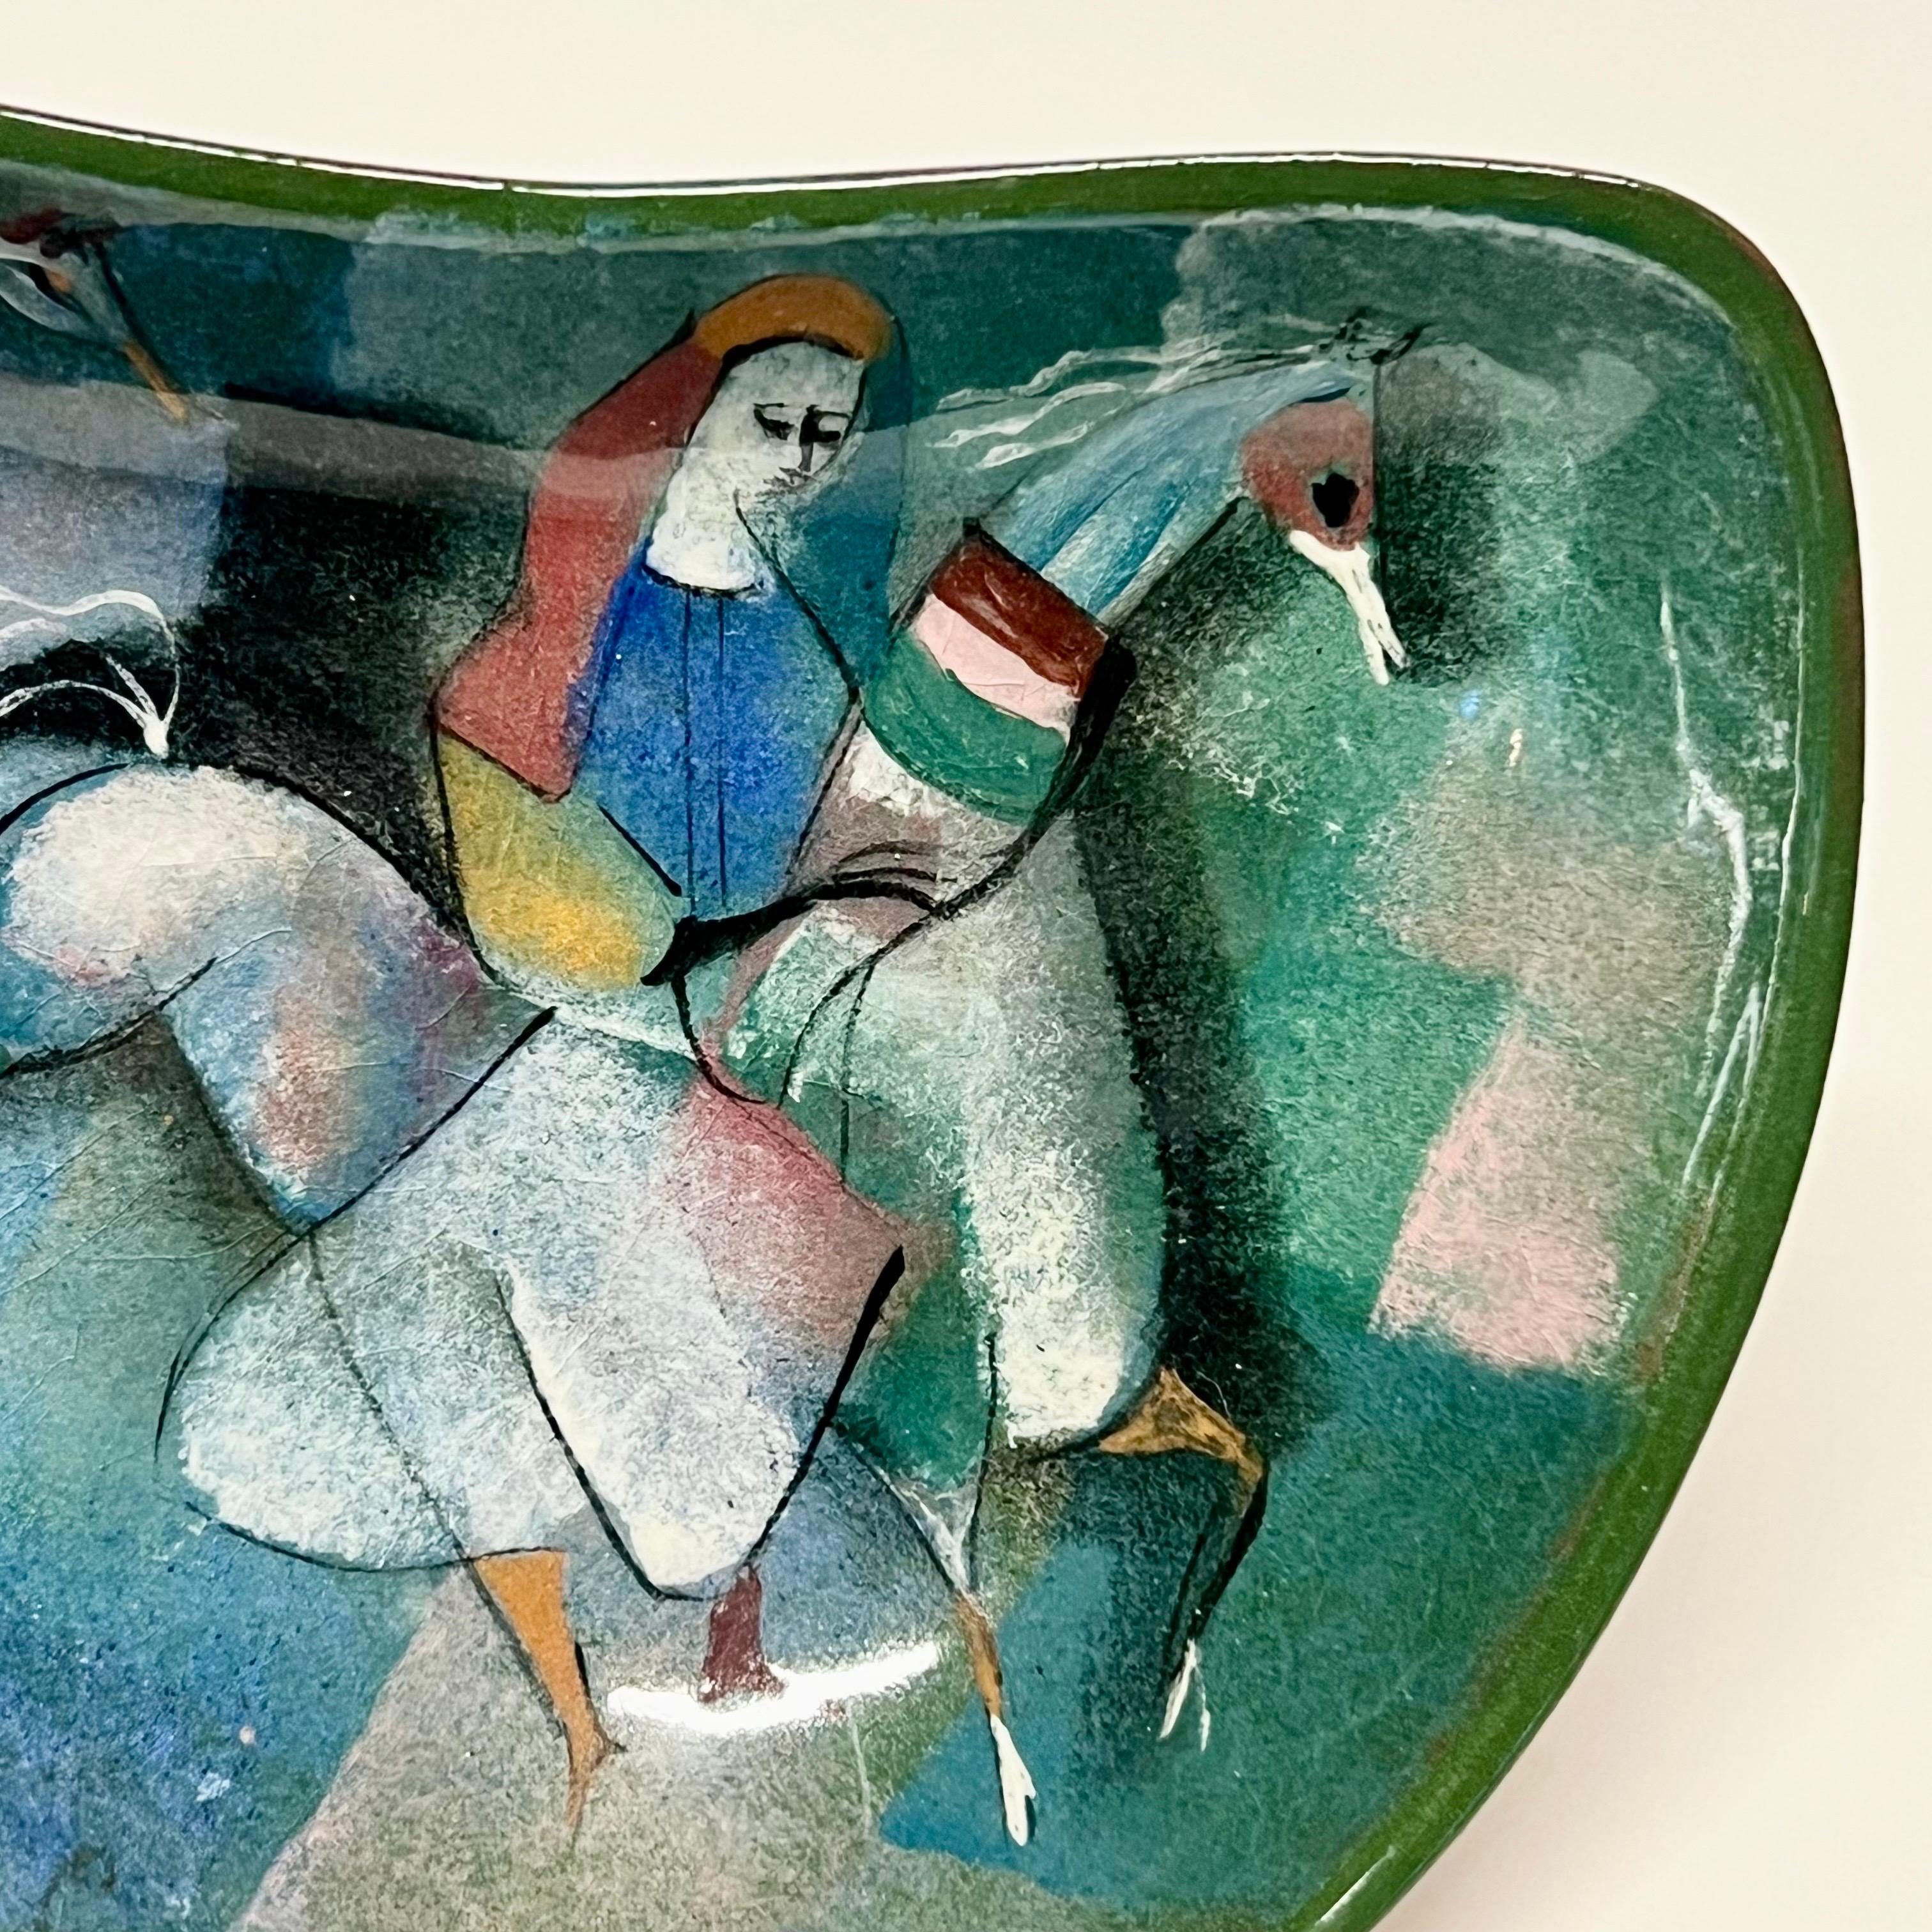 Beautiful organic shaped decorative ceramic tray by noted ceramic artist, Polia Pillin c1950s. 

Polia Pillin, (1909–1992), was a Polish-American ceramist during the 20th century. Born in Częstochowa, Poland, in 1909, she immigrated to the United